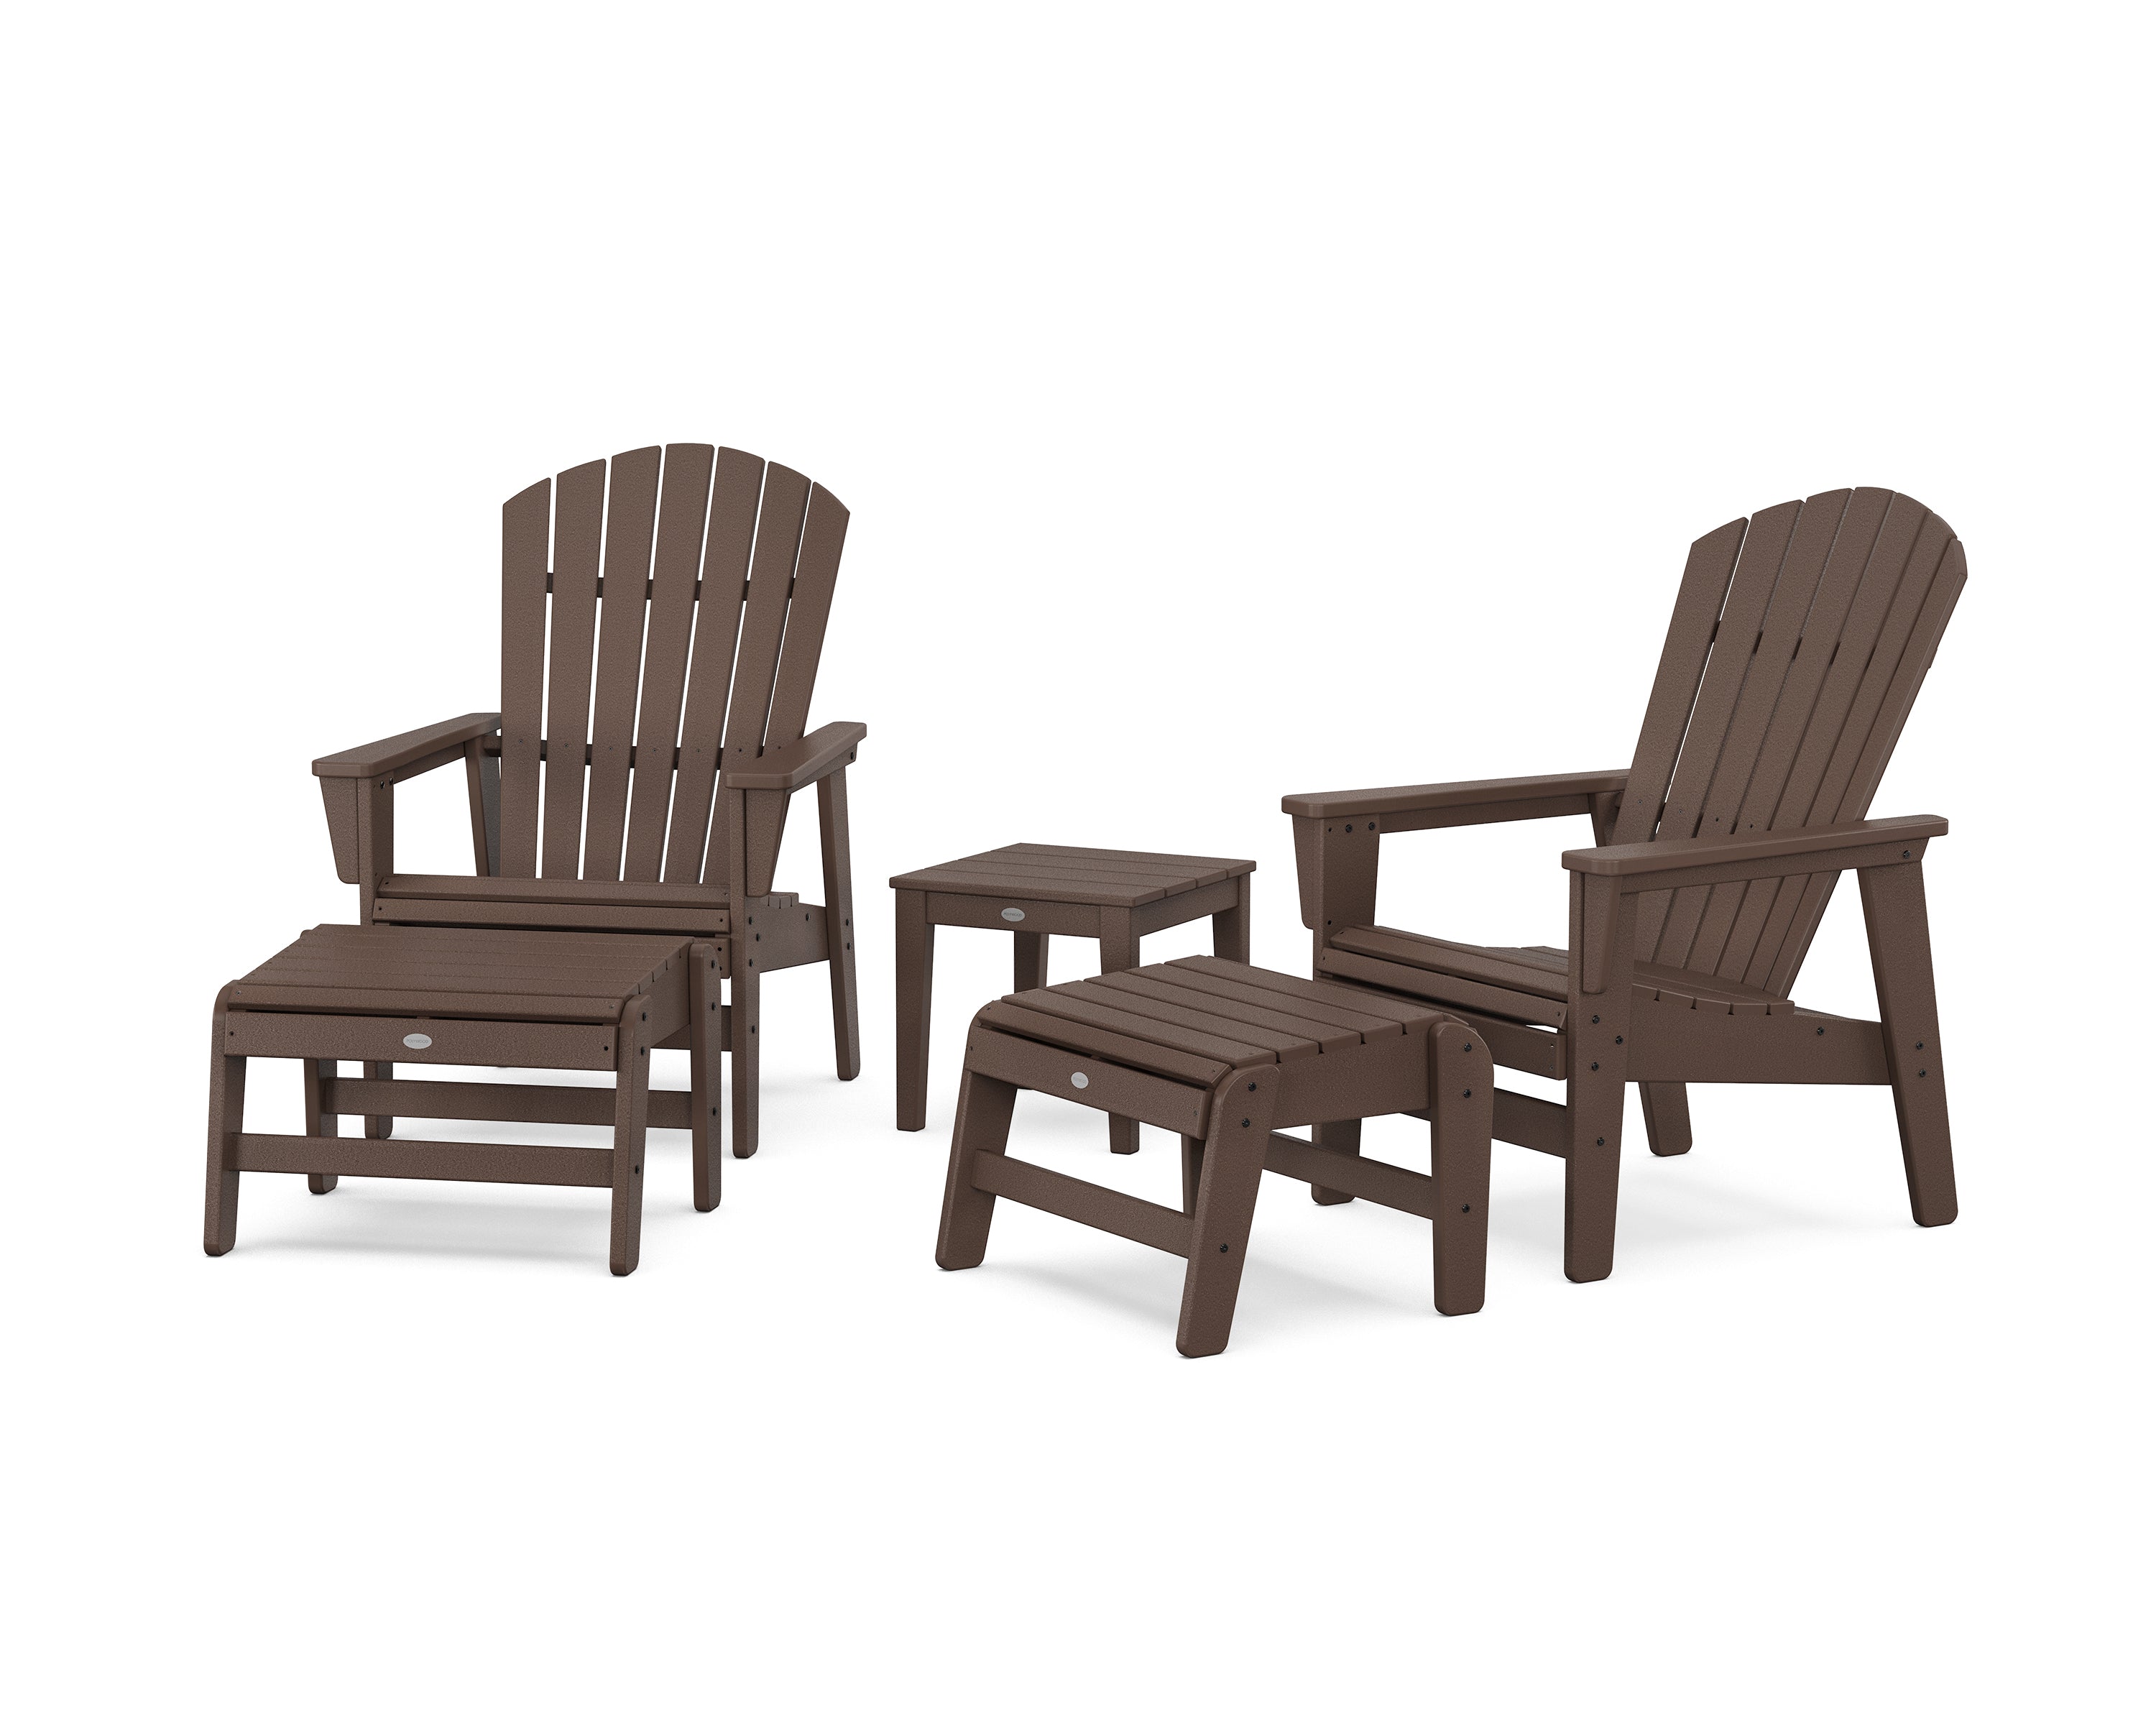 POLYWOOD® 5-Piece Nautical Grand Upright Adirondack Set with Ottomans and Side Table in Mahogany